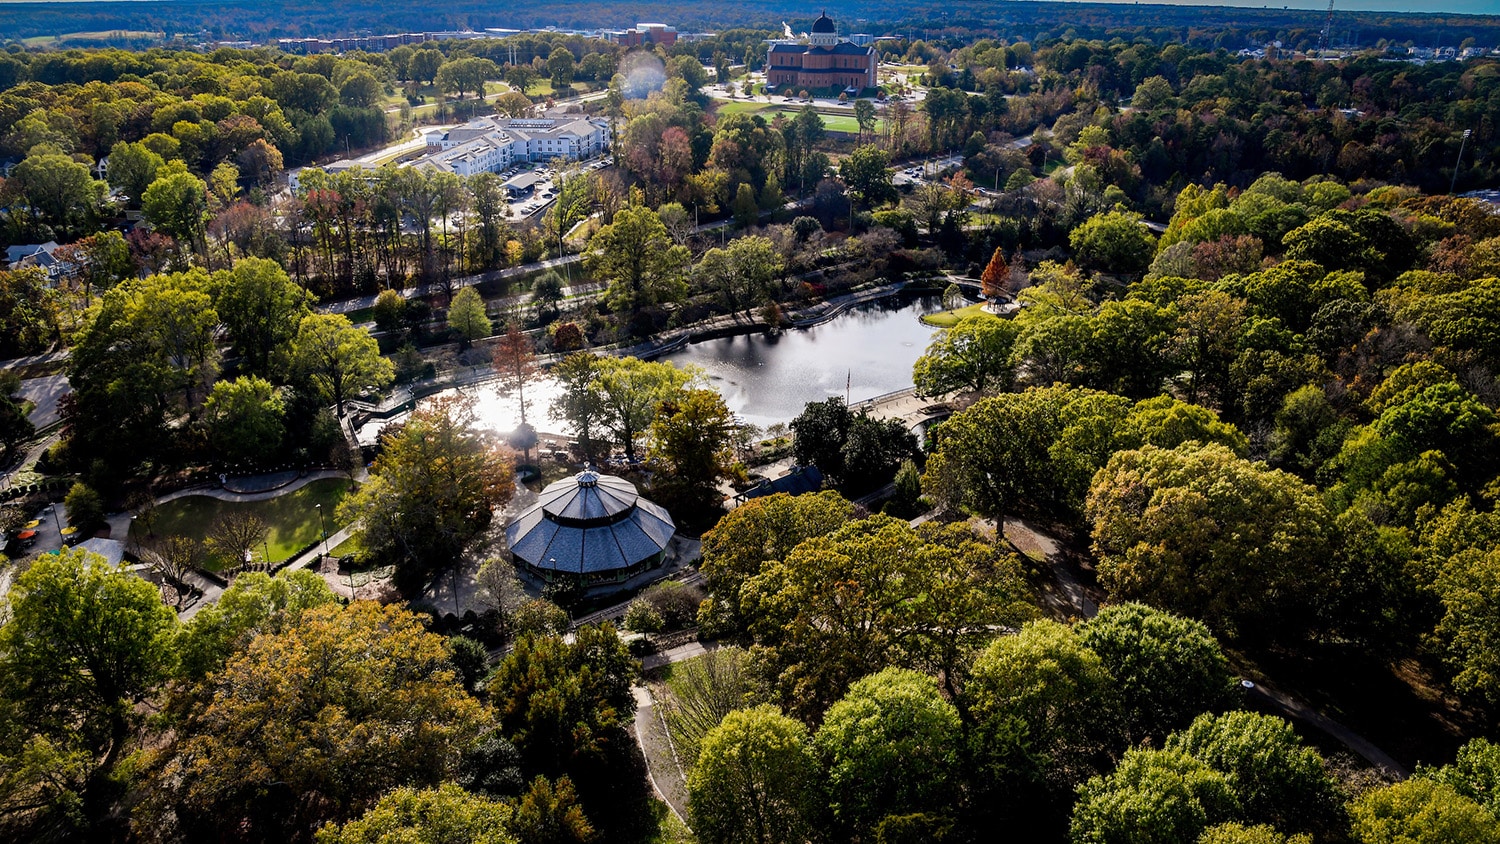 An aerial view of nearby Pullen Park on a sunny day.